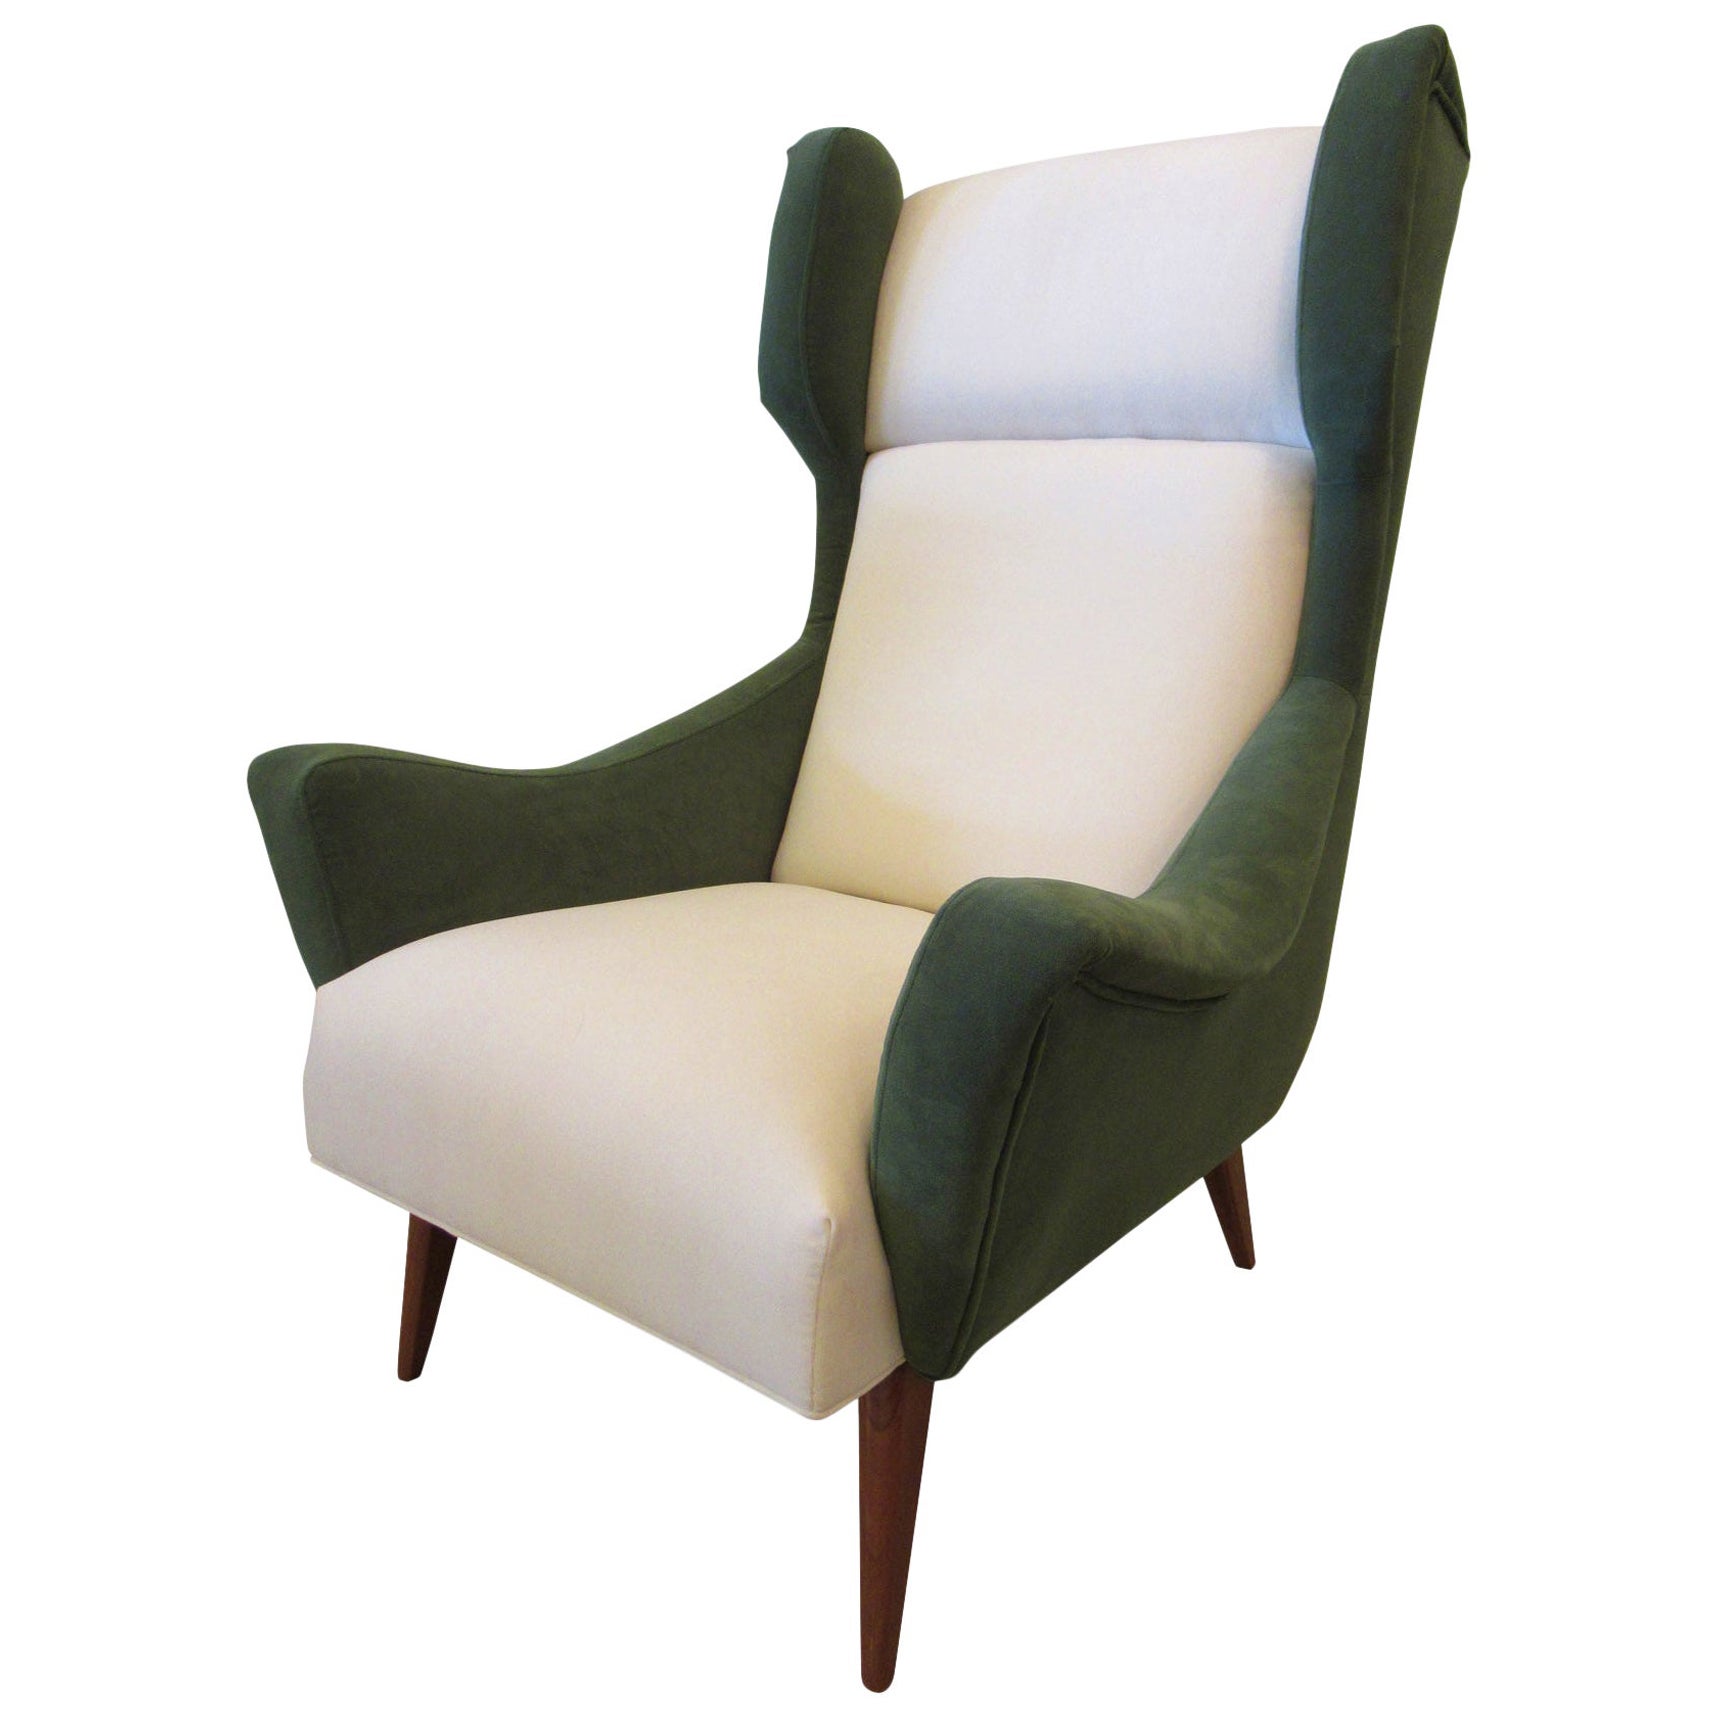 Italian Modern Upholstered Wing Chair, Gio Ponti, 1950's For Sale